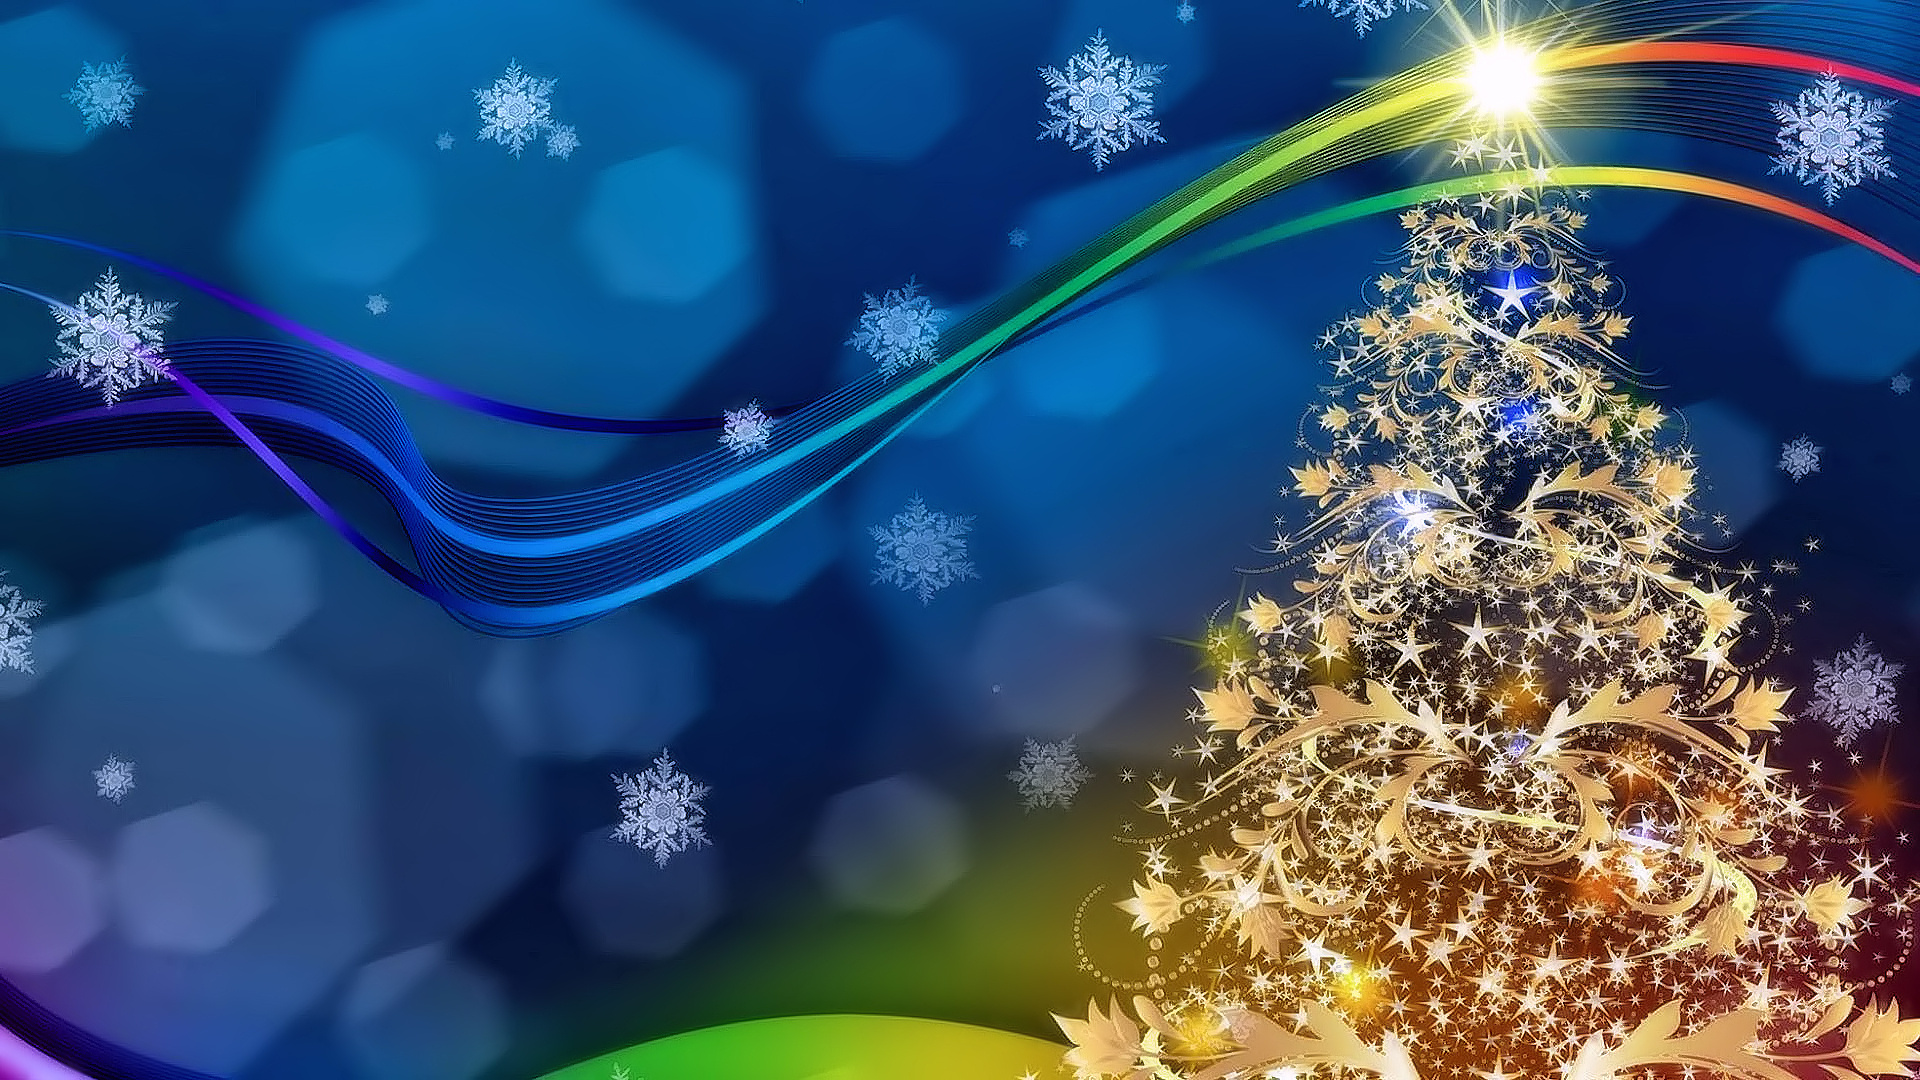 Golden Christmas Tree Flakes Decorative Festive Hd Wallpaper For